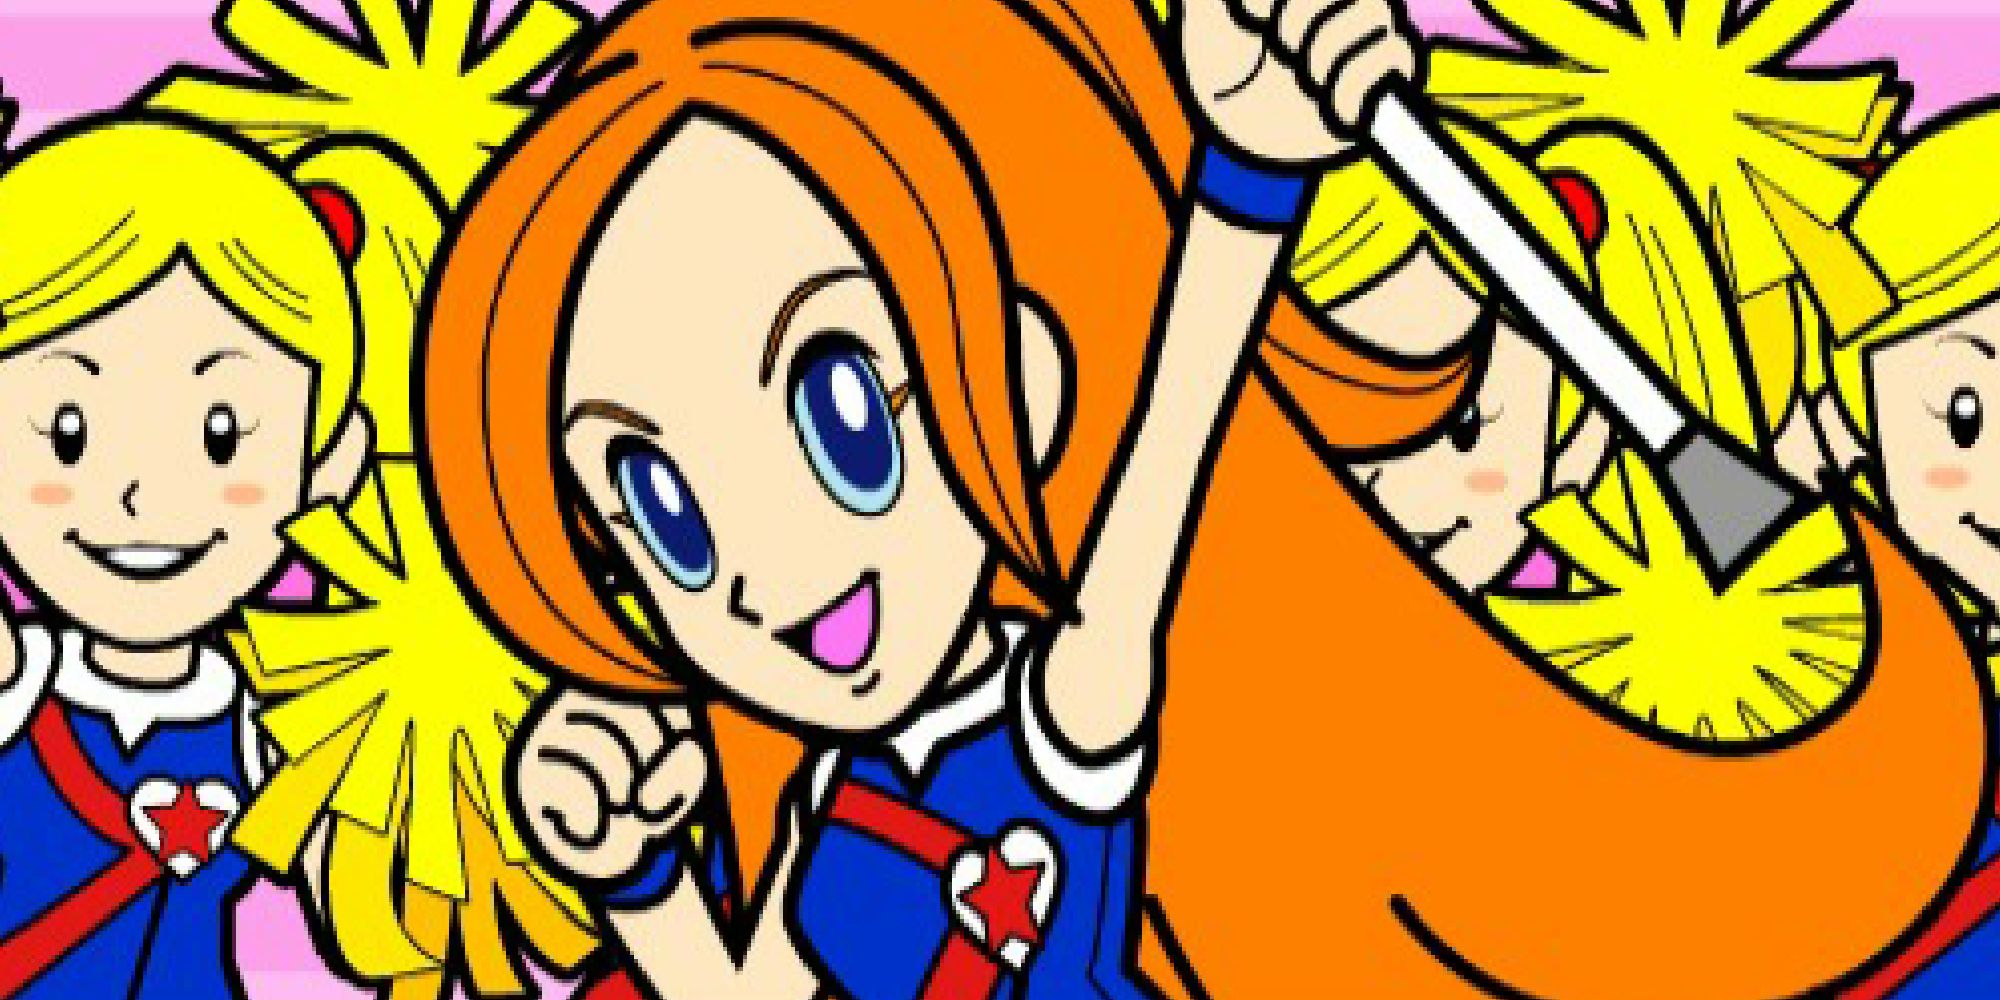 Mona cheerleading in a cutscene from WarioWare Smooth Moves